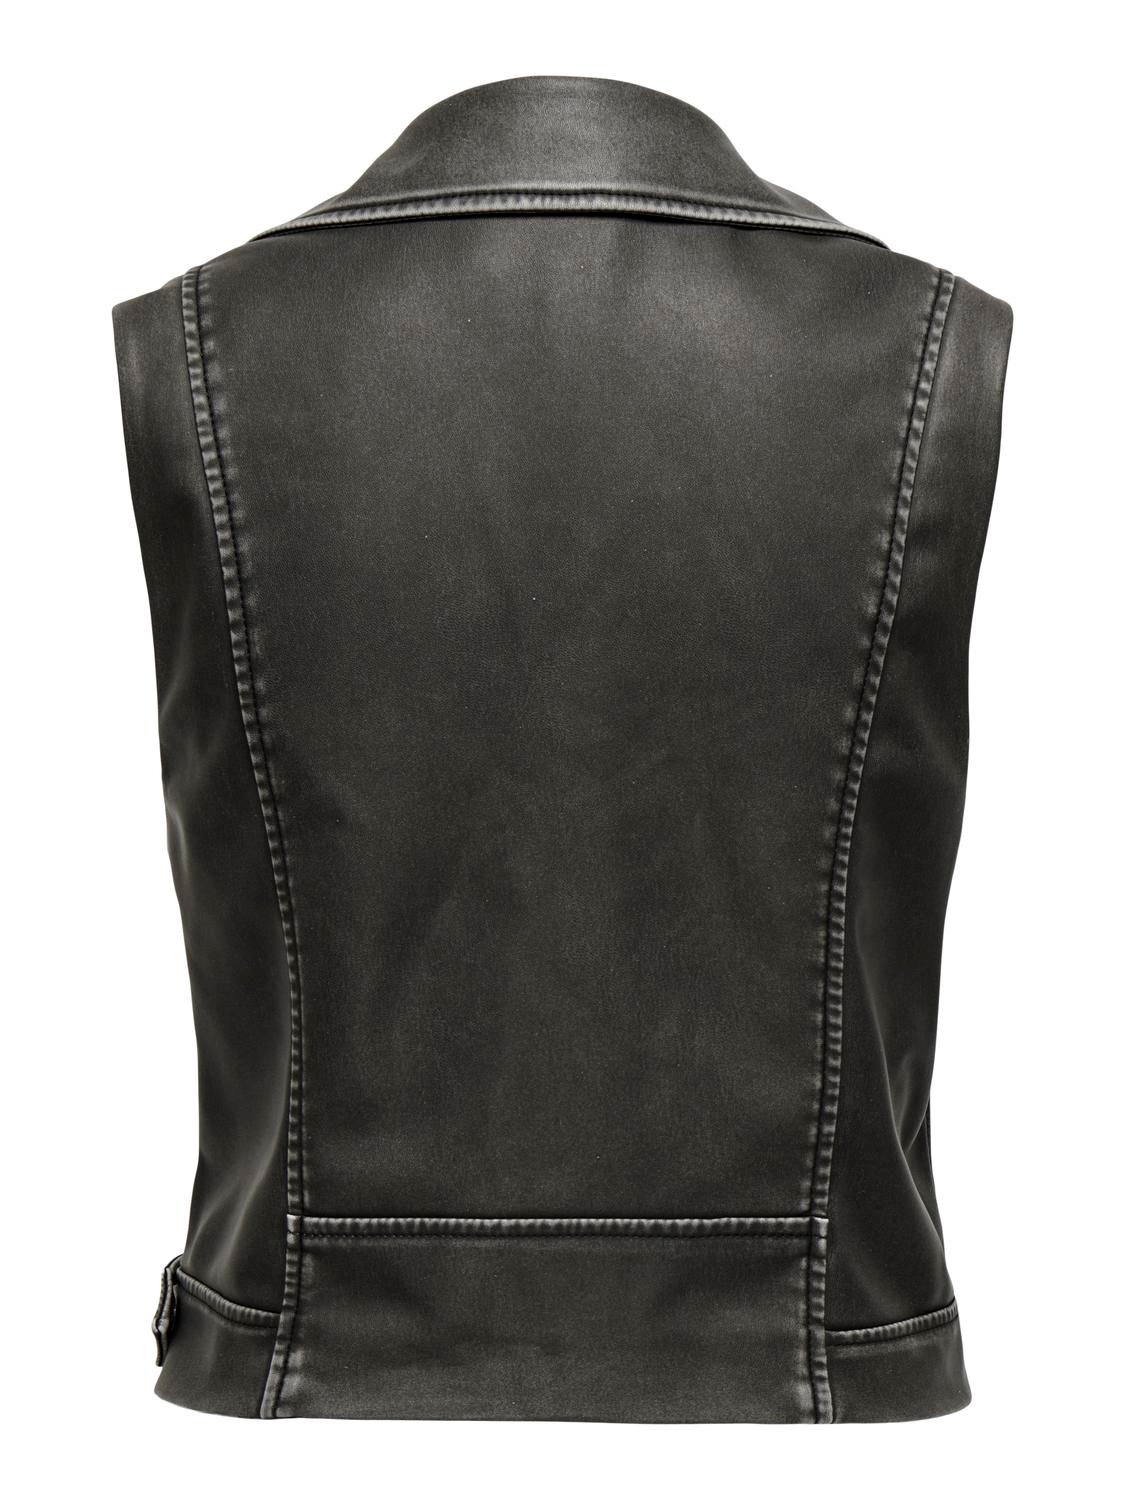 ONLY Faux leather gilet -Black - 15316827